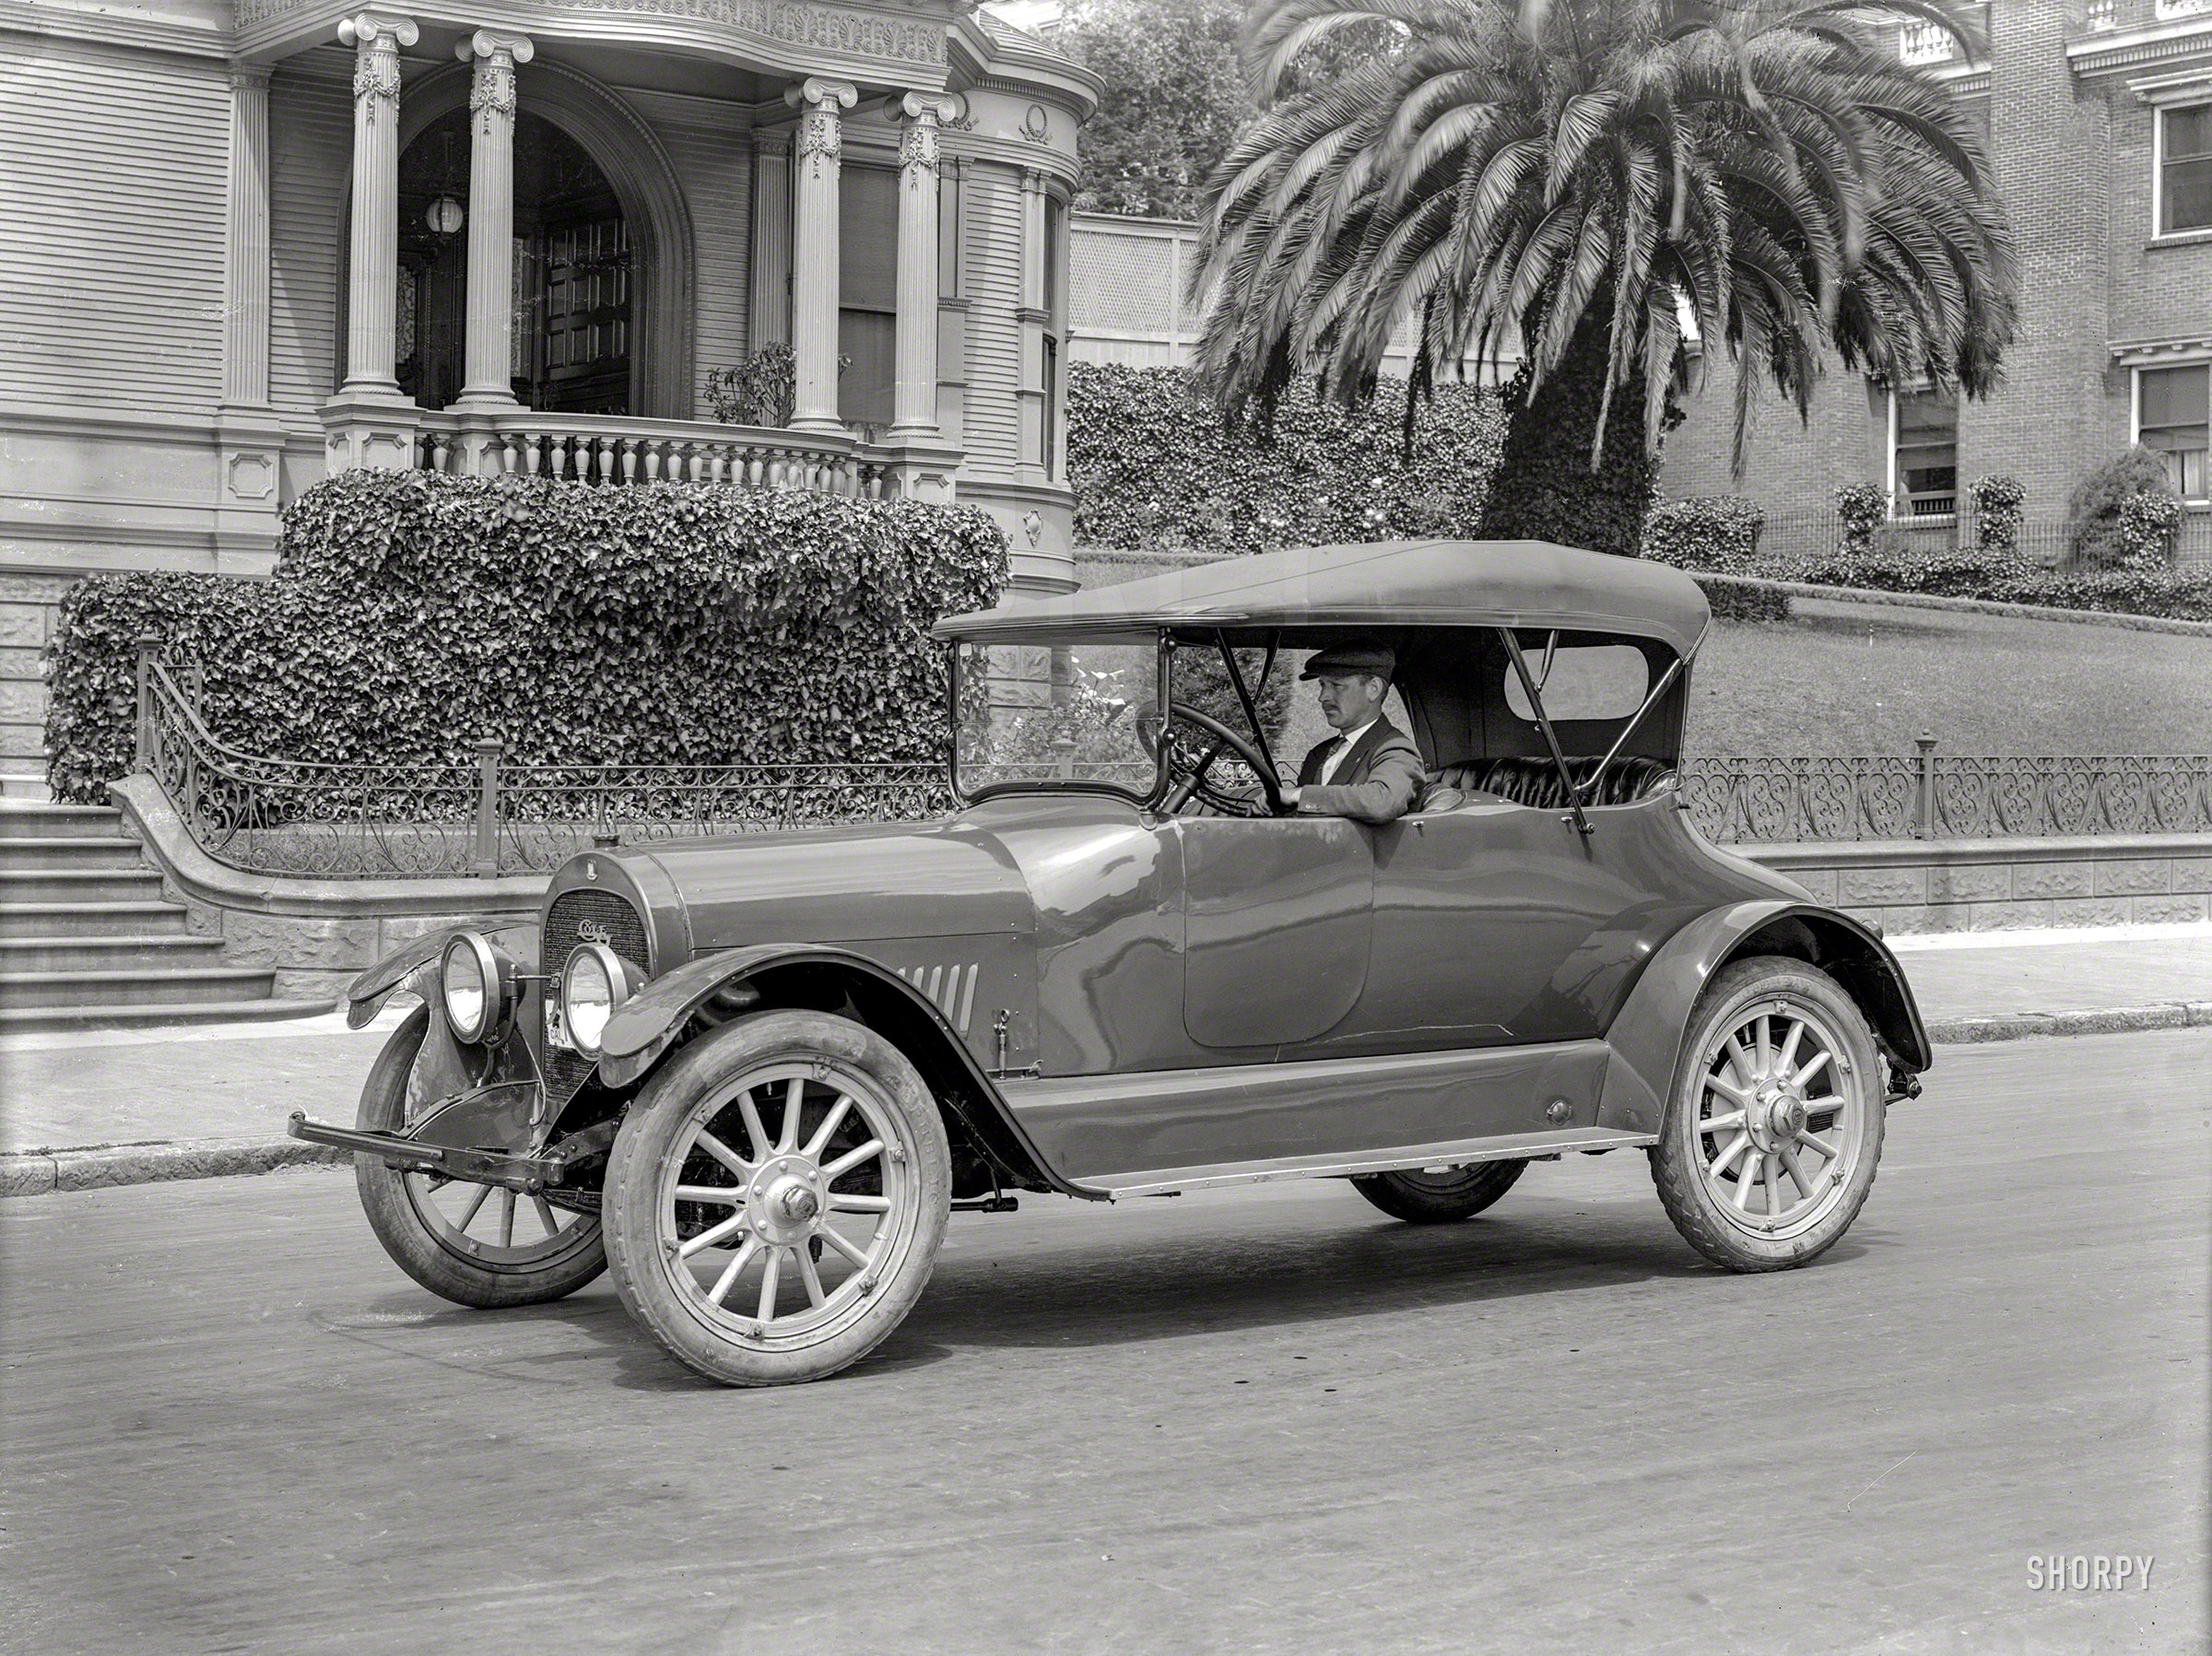 San Francisco, 1919. "Cole auto." Climb in, if you can figure out how. The yard last seen here. 5x7 glass negative by Christopher Helin. View full size.